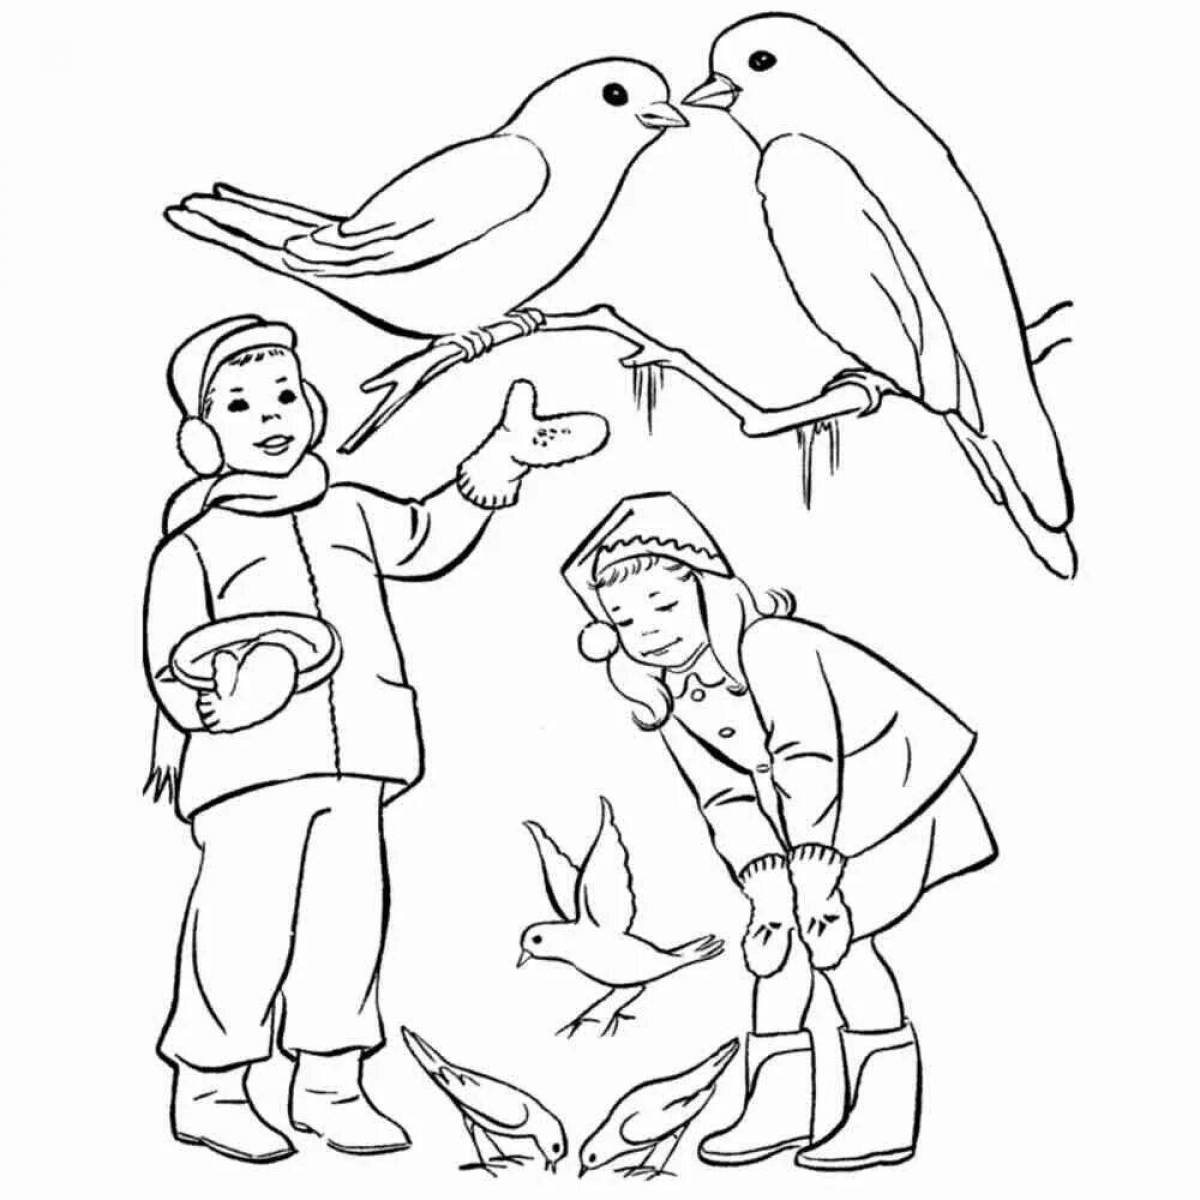 Colorful winter birds coloring page